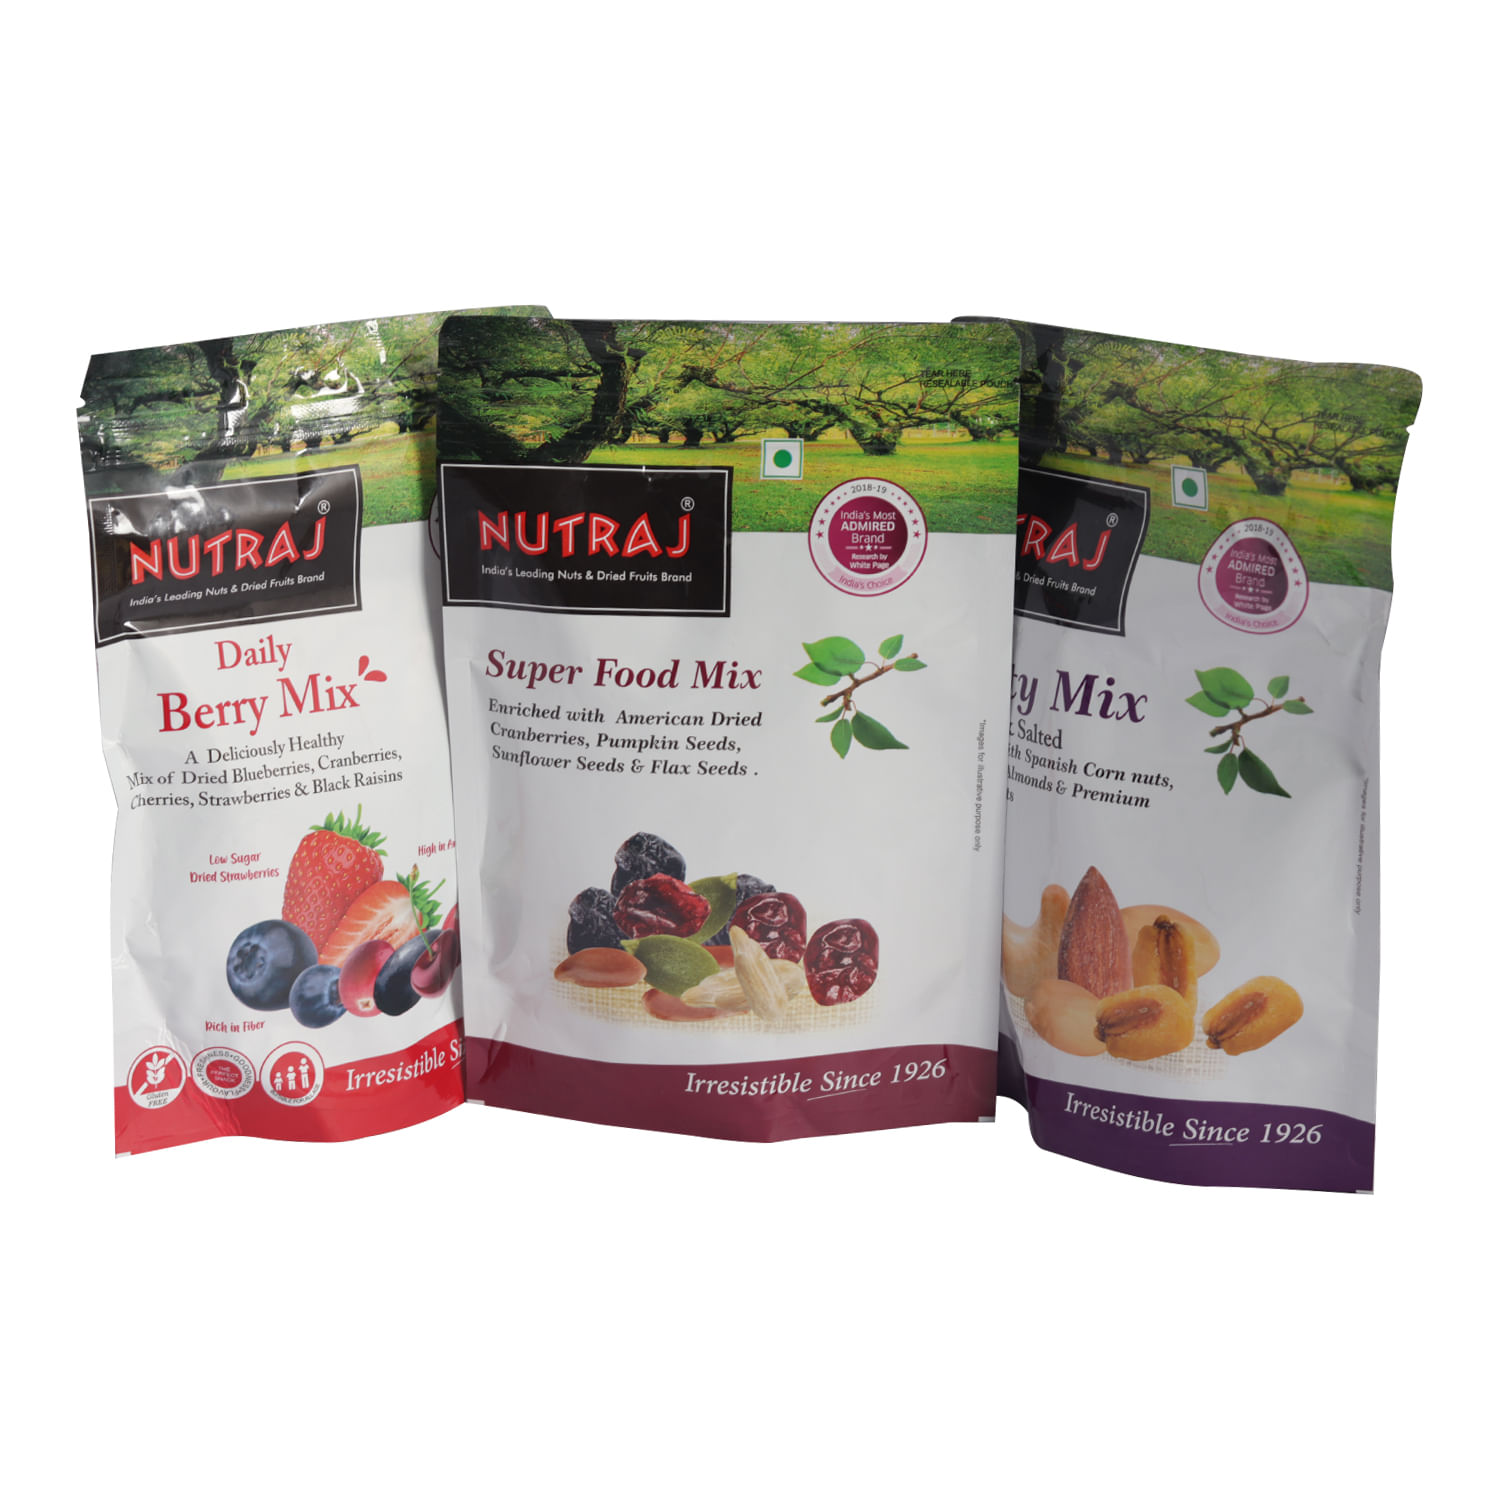 Nutraj Mixed Dry Fruit Gift Pack 550g - (Super food mix 200g, Party mix 150g, Daily Berry mix 100g)